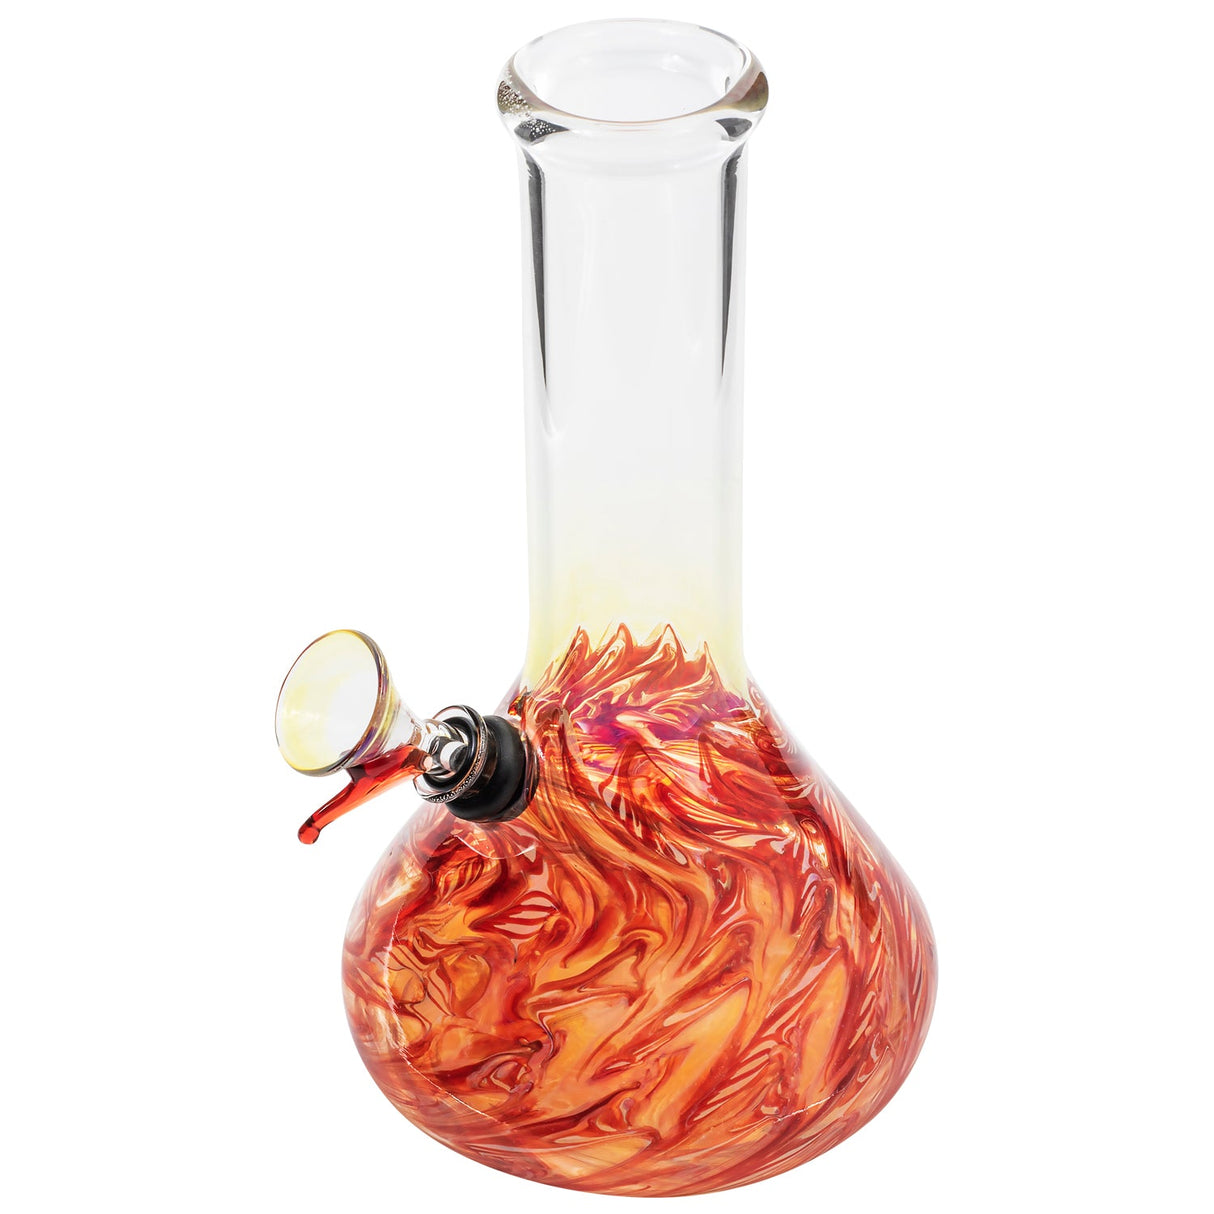 LA Pipes 8" Raked Beaker Water Pipe with fiery design, 45-degree grommet joint, for dry herbs